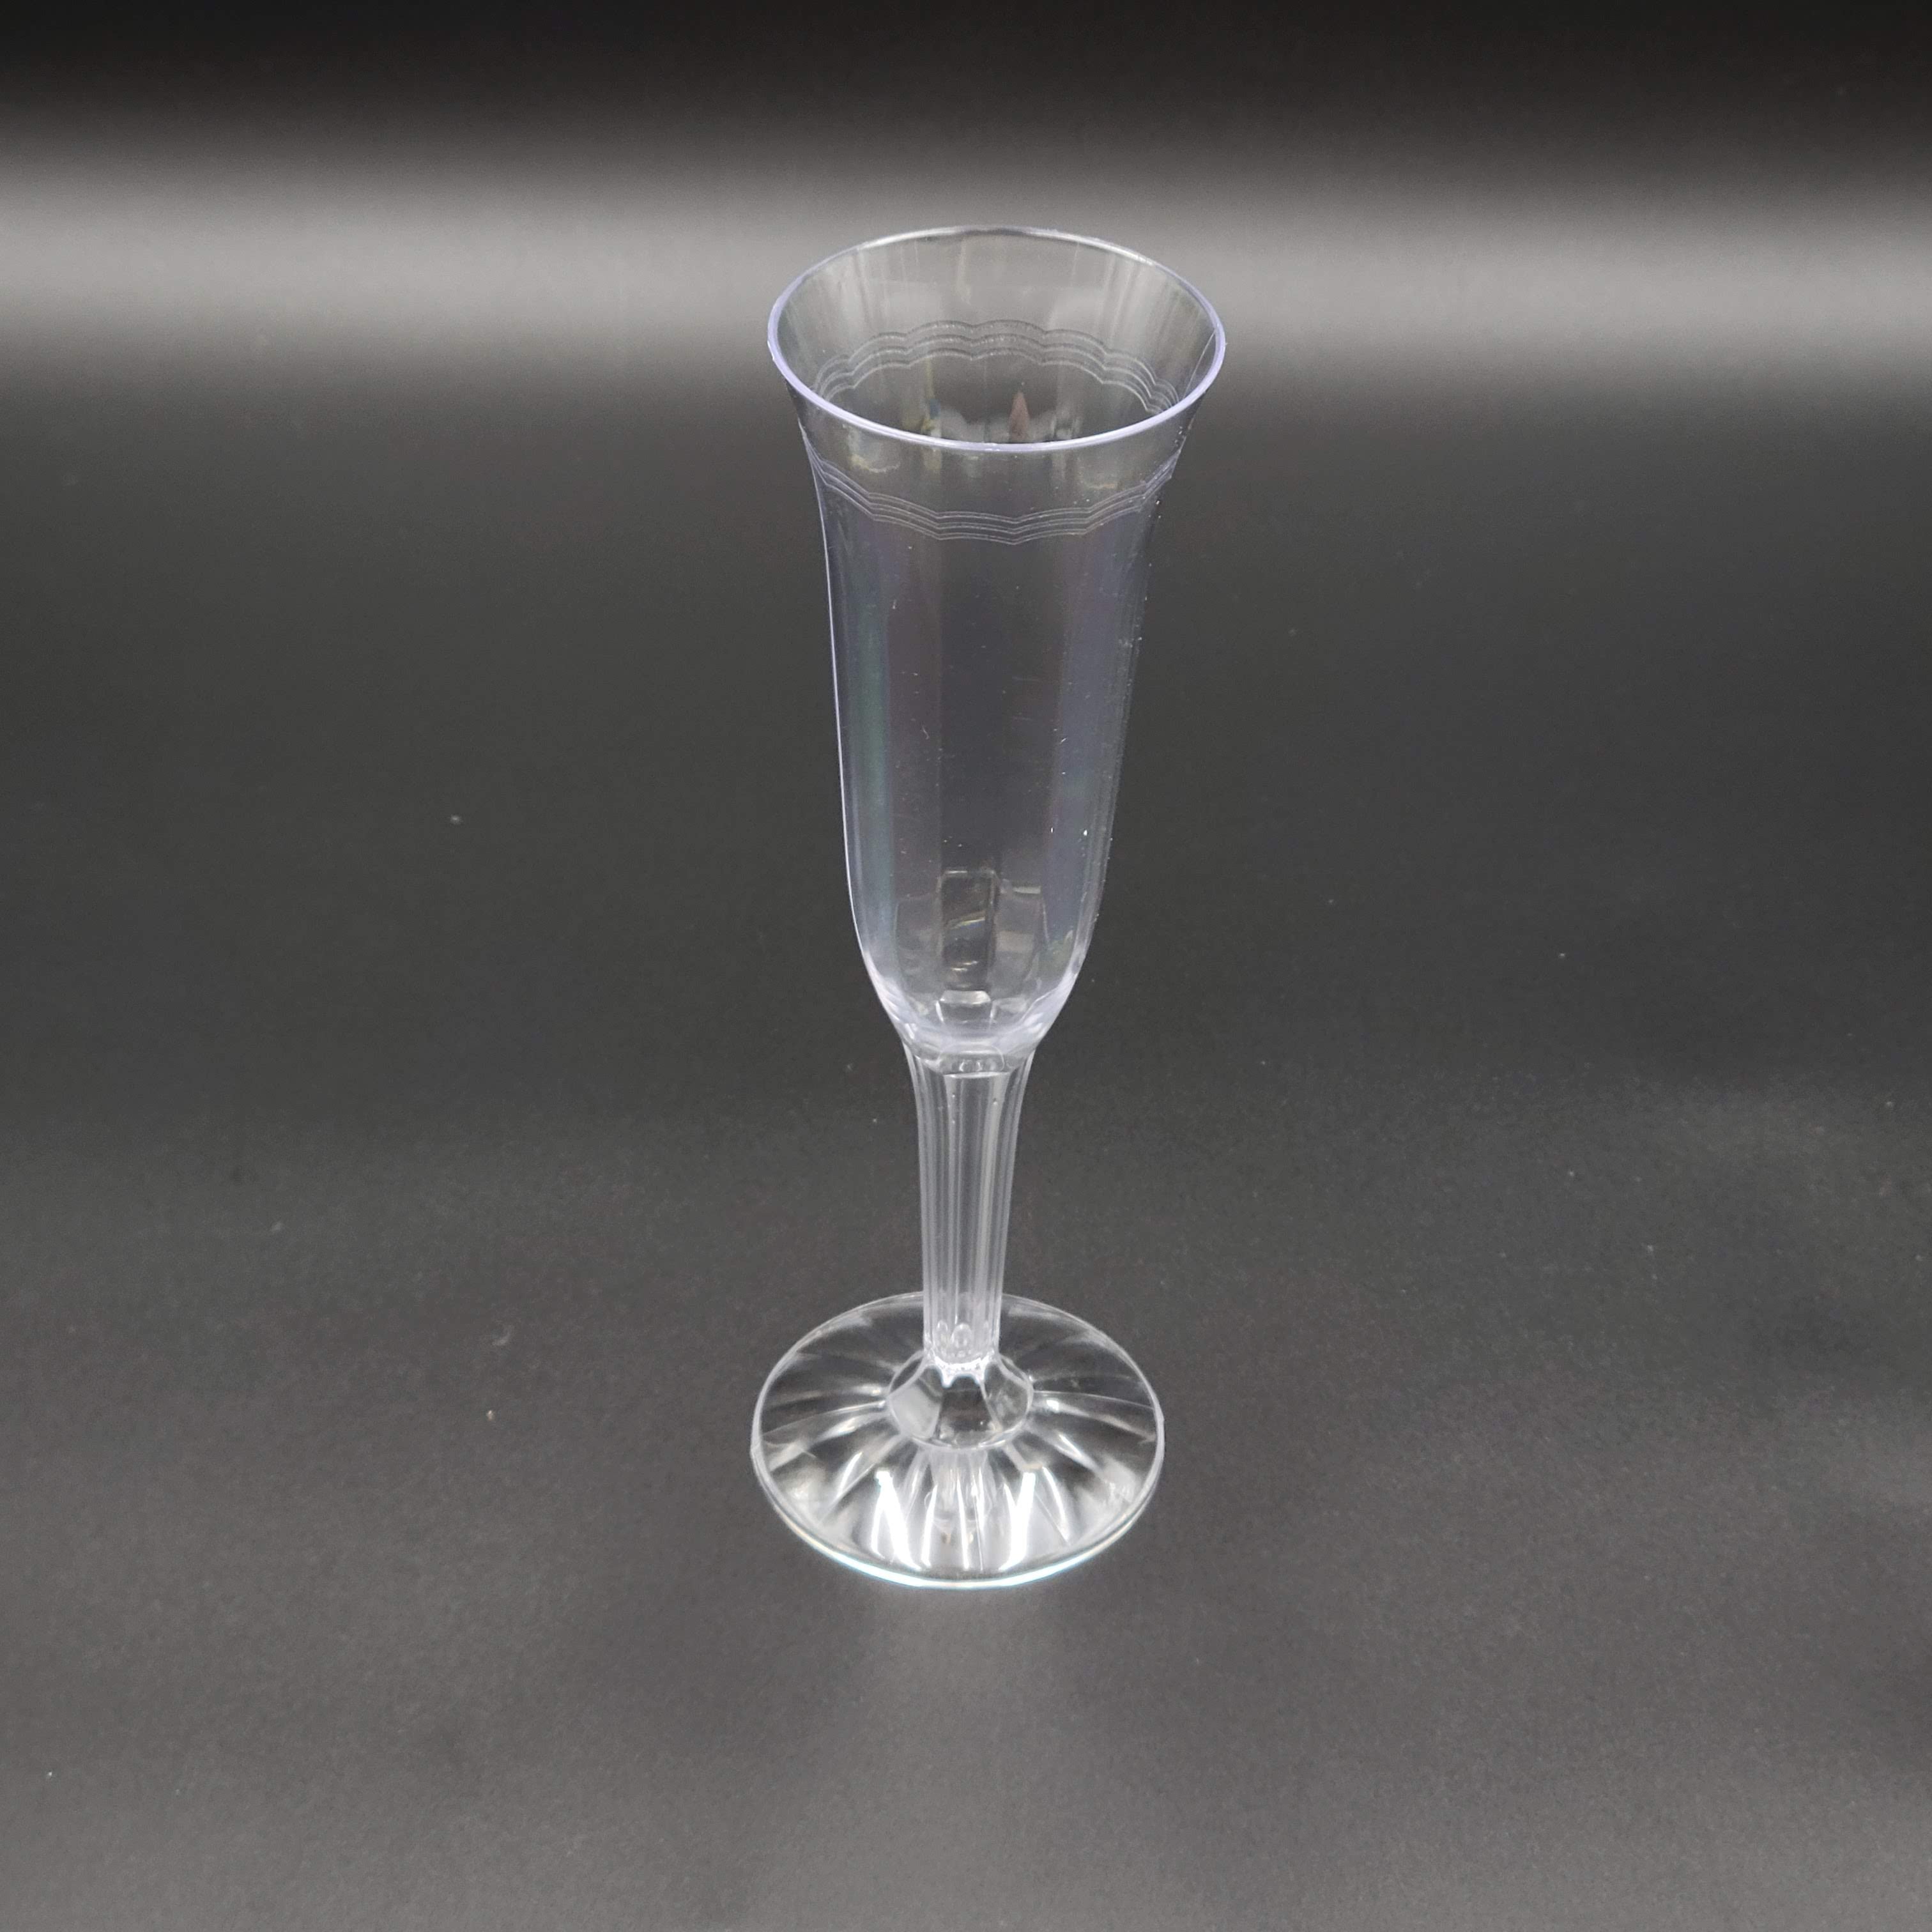 EMI Resposables 1 Piece Fluted Champagne Glass 5 oz. - 96/Case